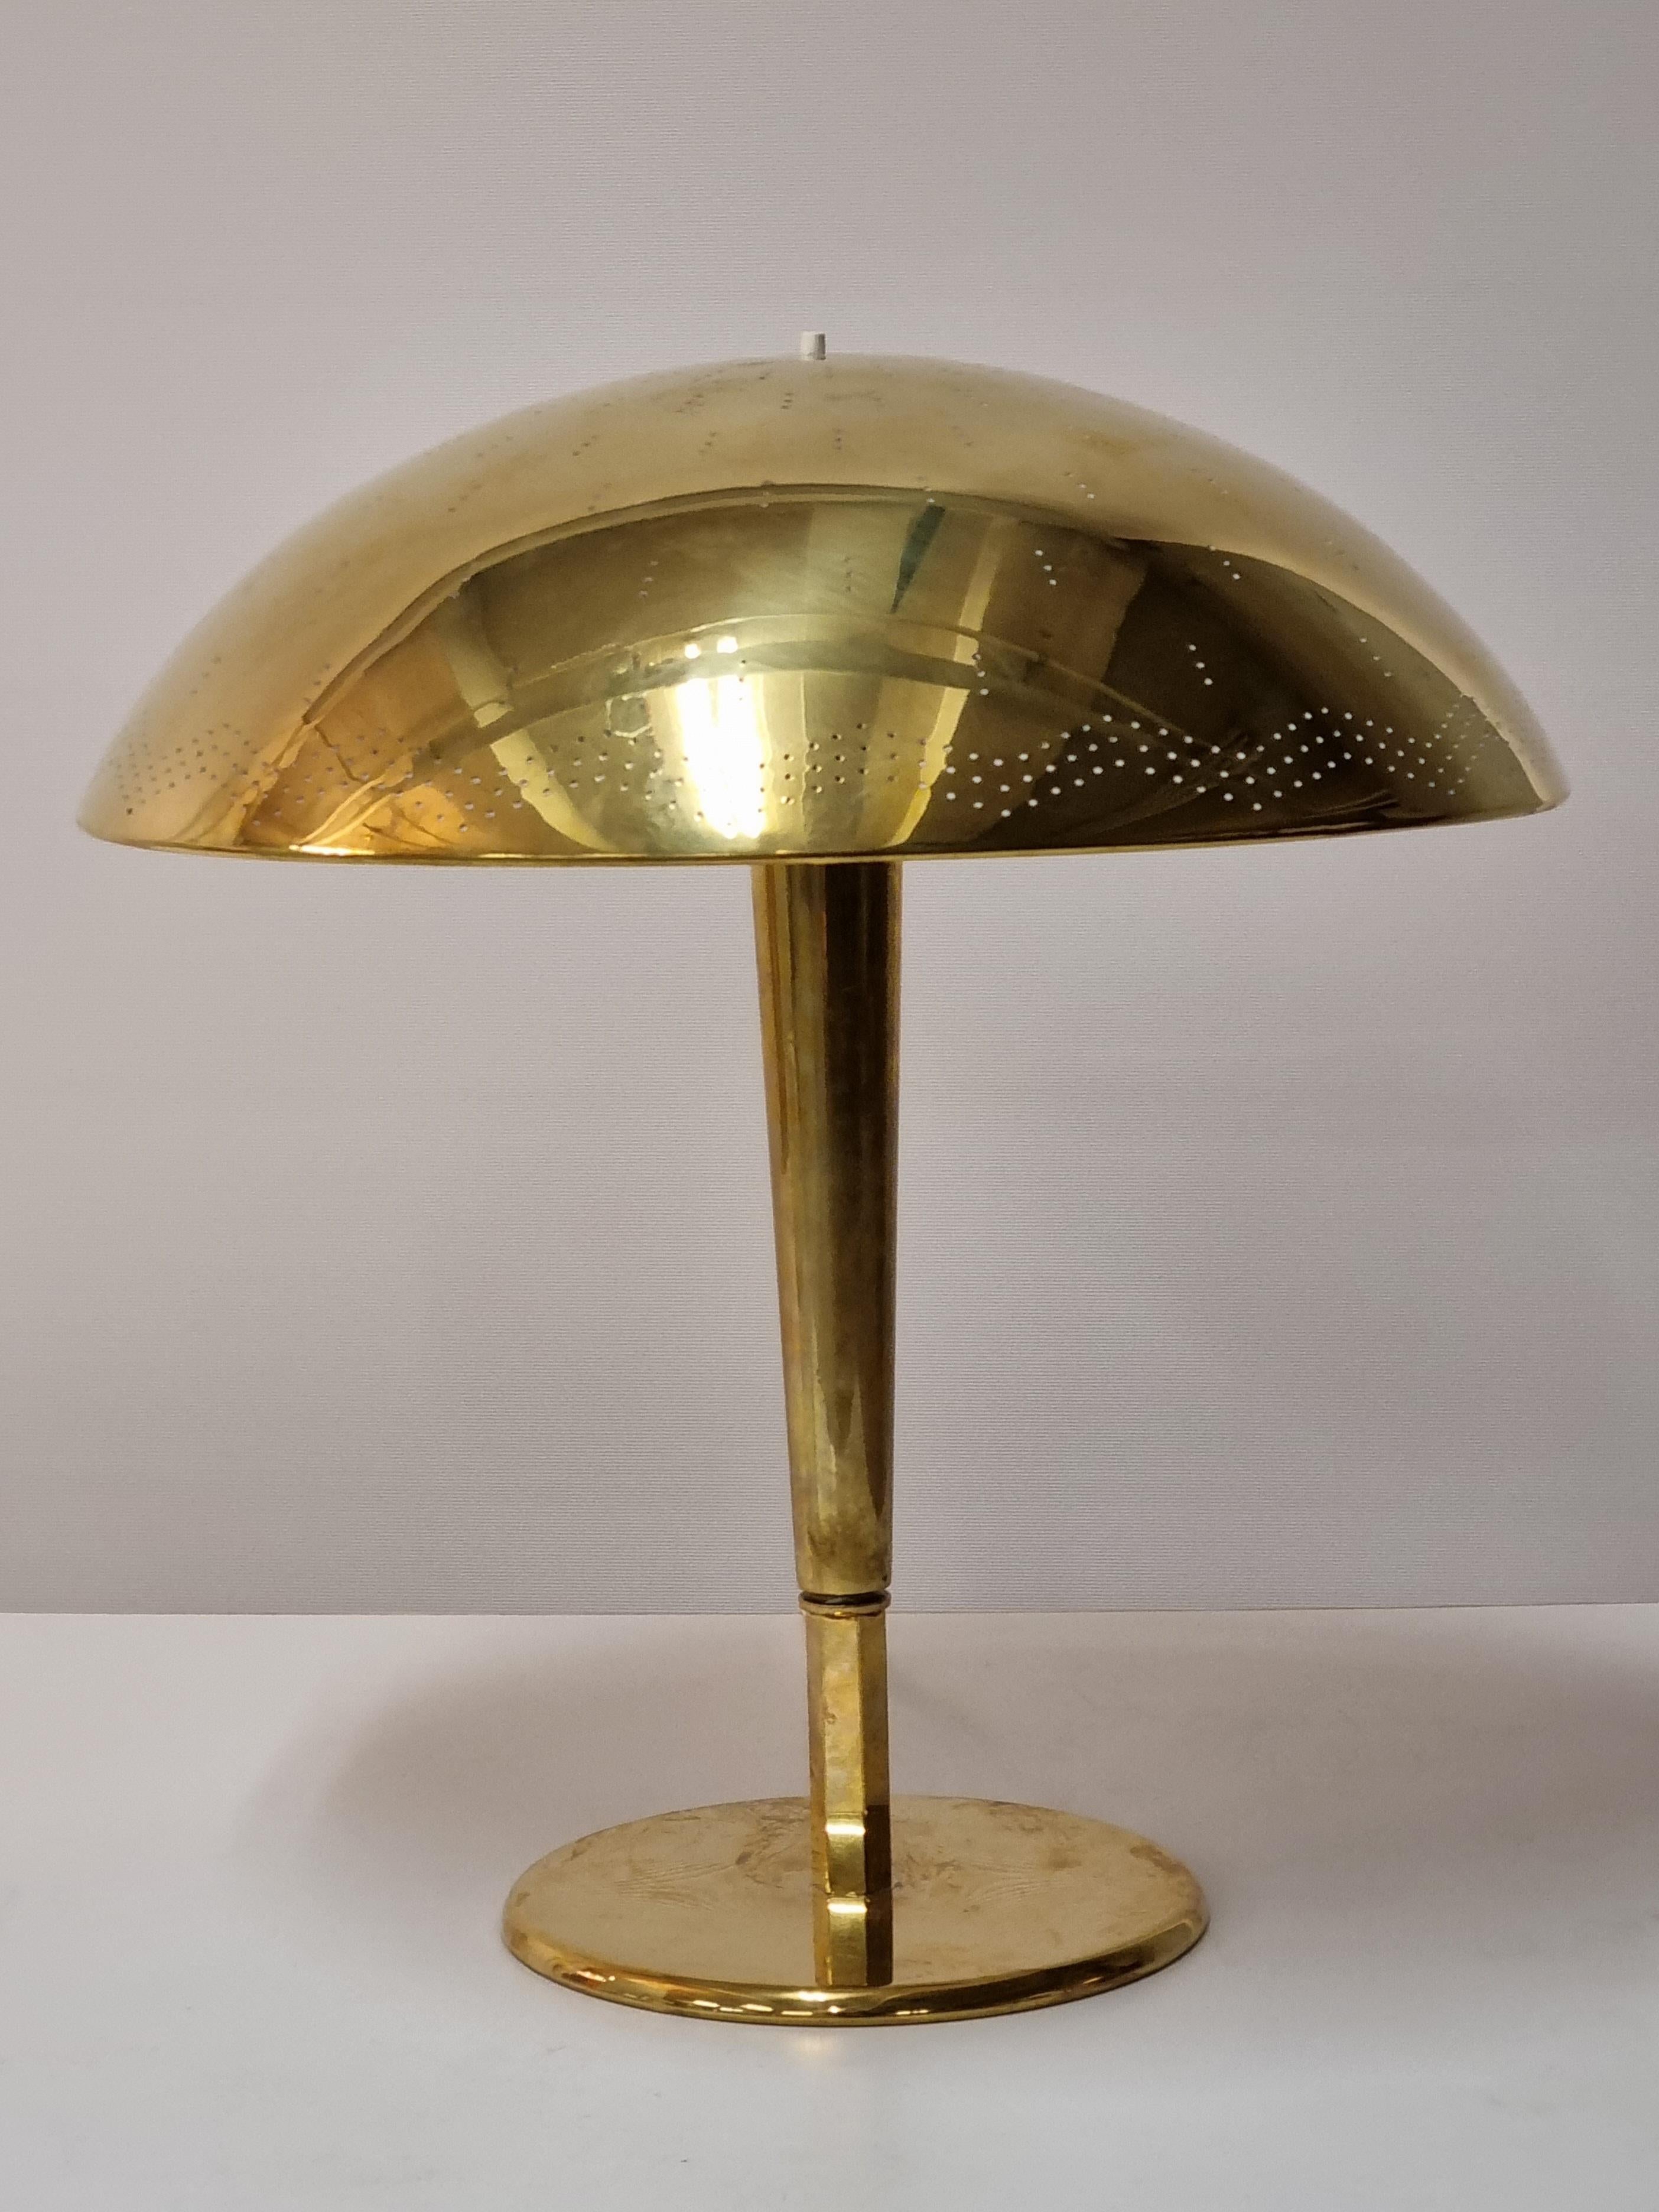 Finnish Paavo Tynell Table Lamp, Model 5061, Idman, 1950s For Sale